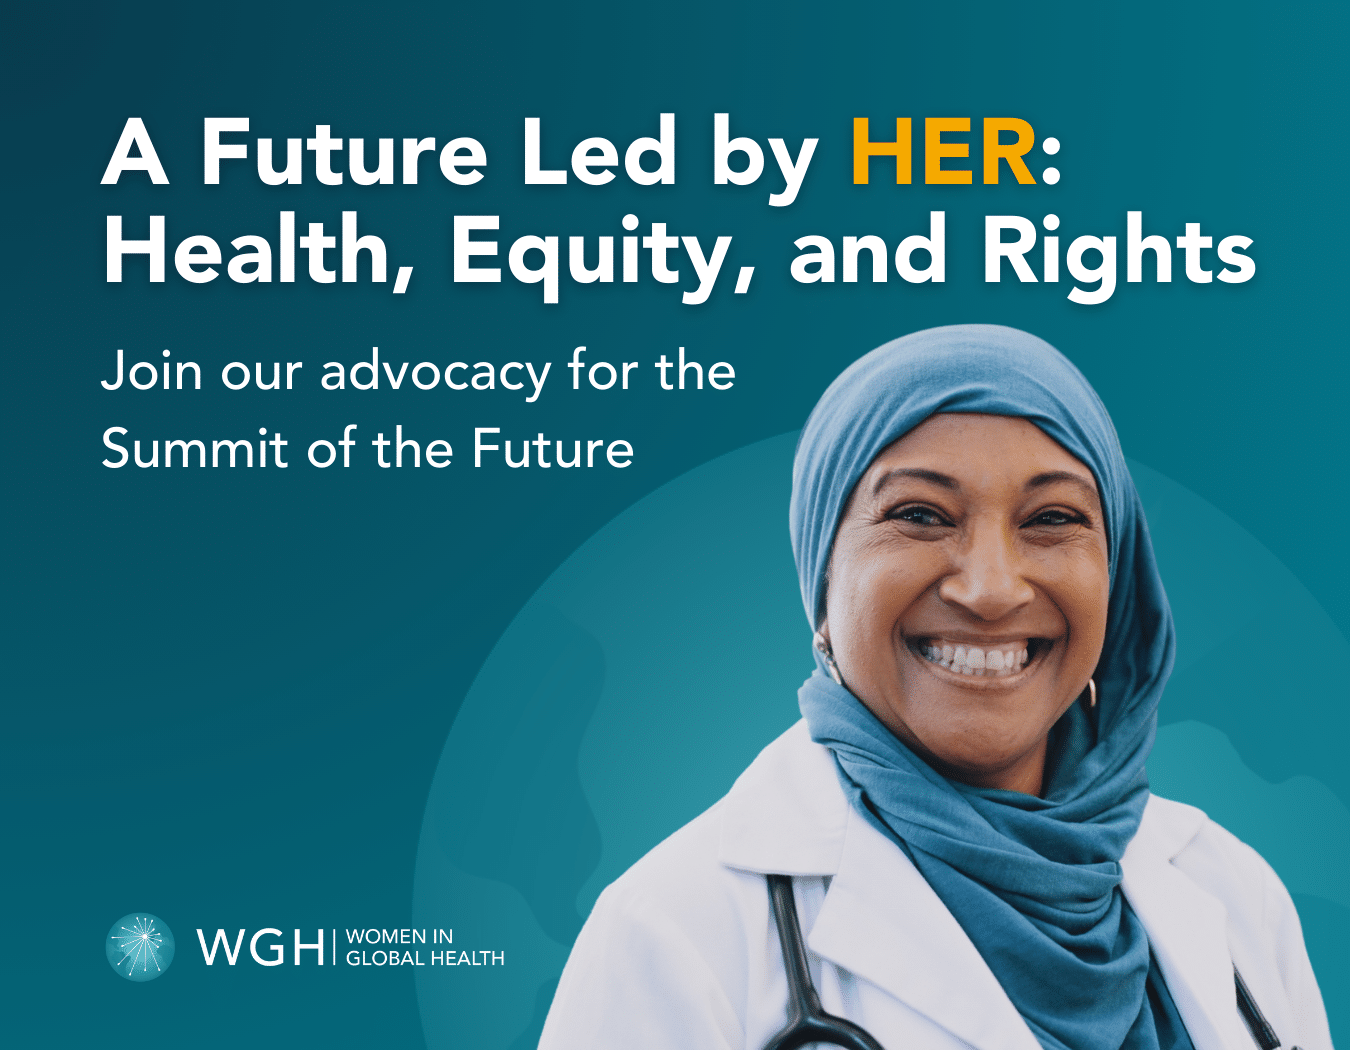 A future led by HER - Health, Equity and Rights